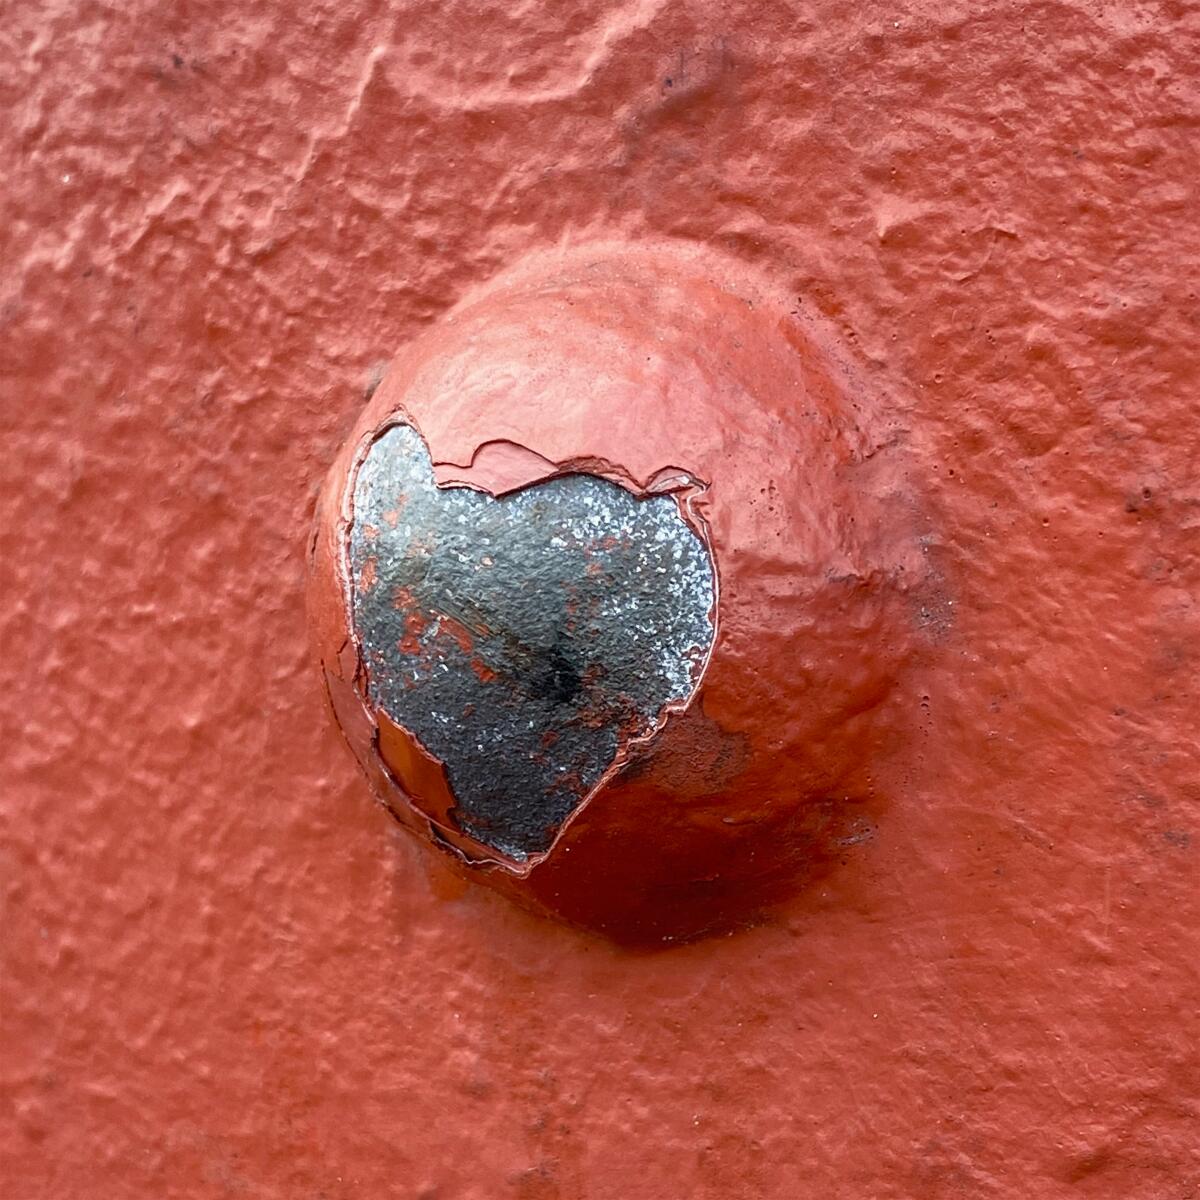 Paint is chipped away in the shape of a heart on one of the rivets of the Golden Gate Bridge.